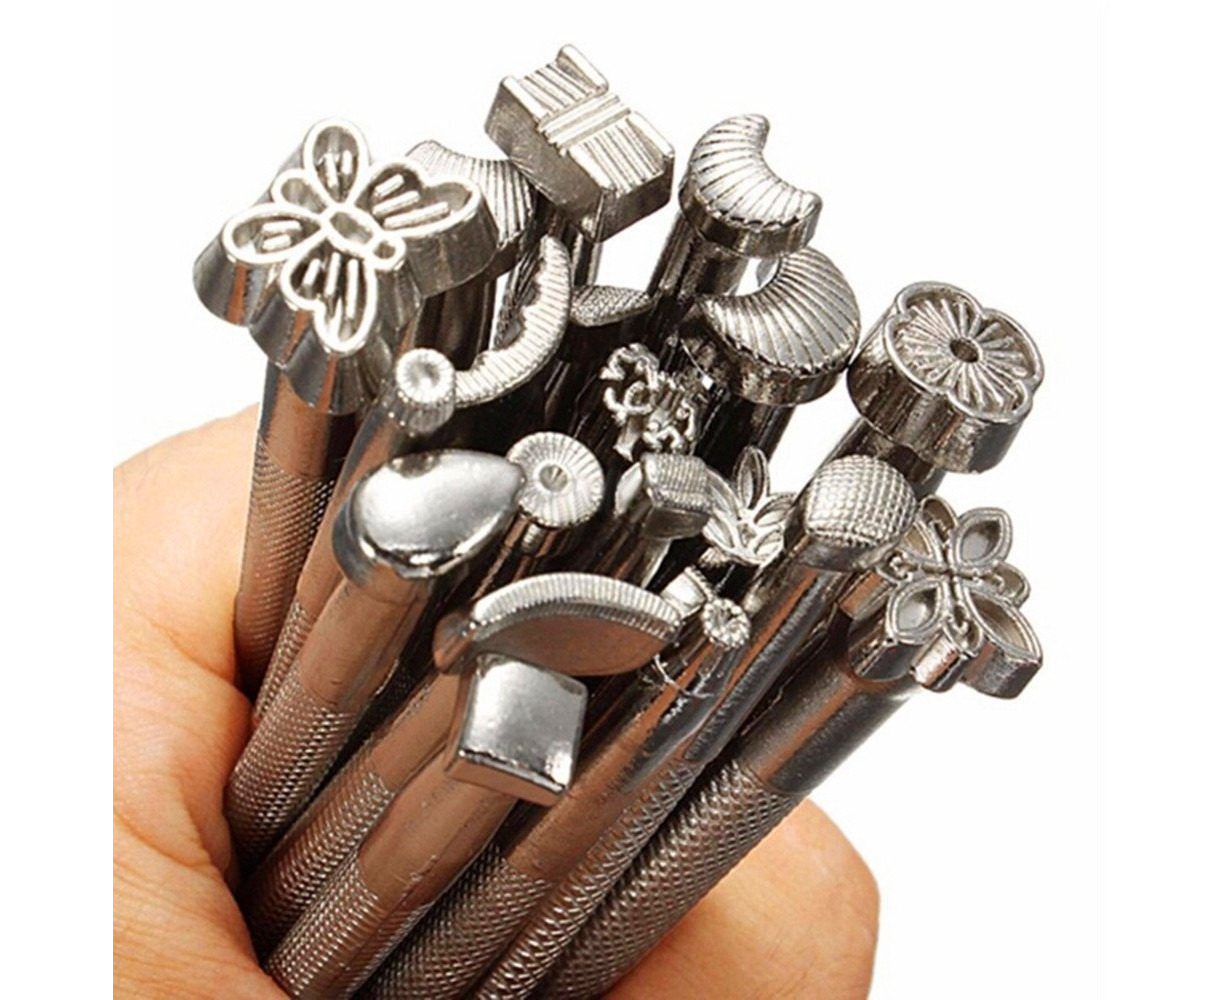 Jupean Leather Stamping Tools, Leather Working Saddle Making Stamps Set  Special Shape Stamp Punch Set Carving Leather Craft Stamp Handmade Art Tools